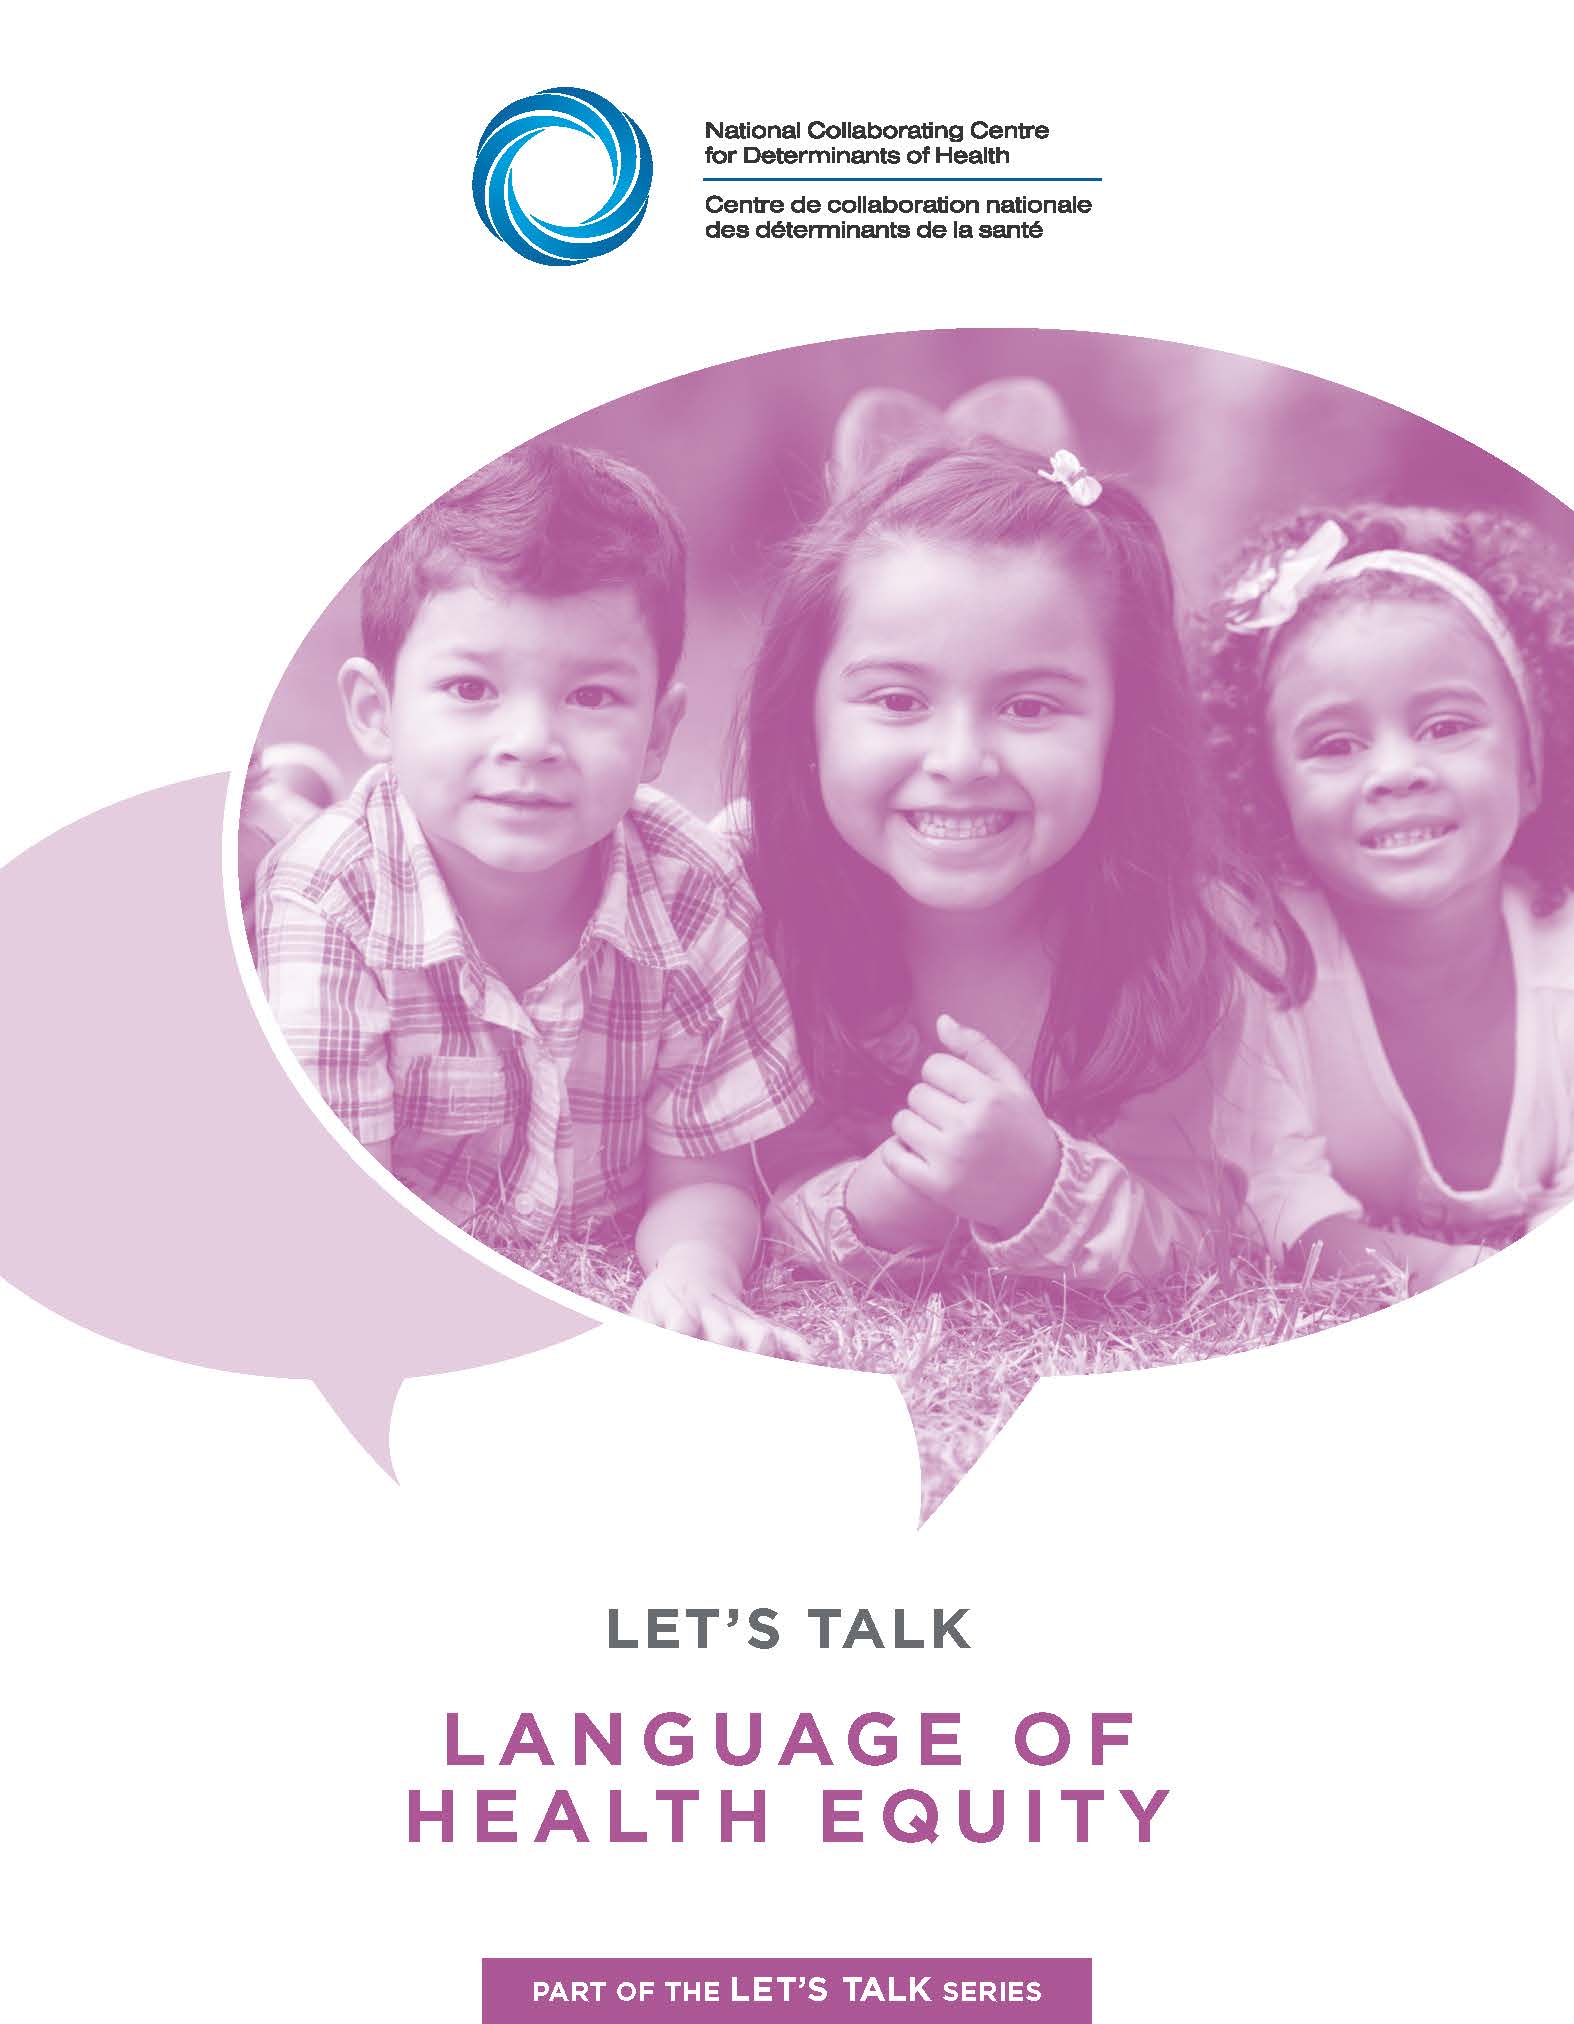 Let’s Talk: Language of health equity